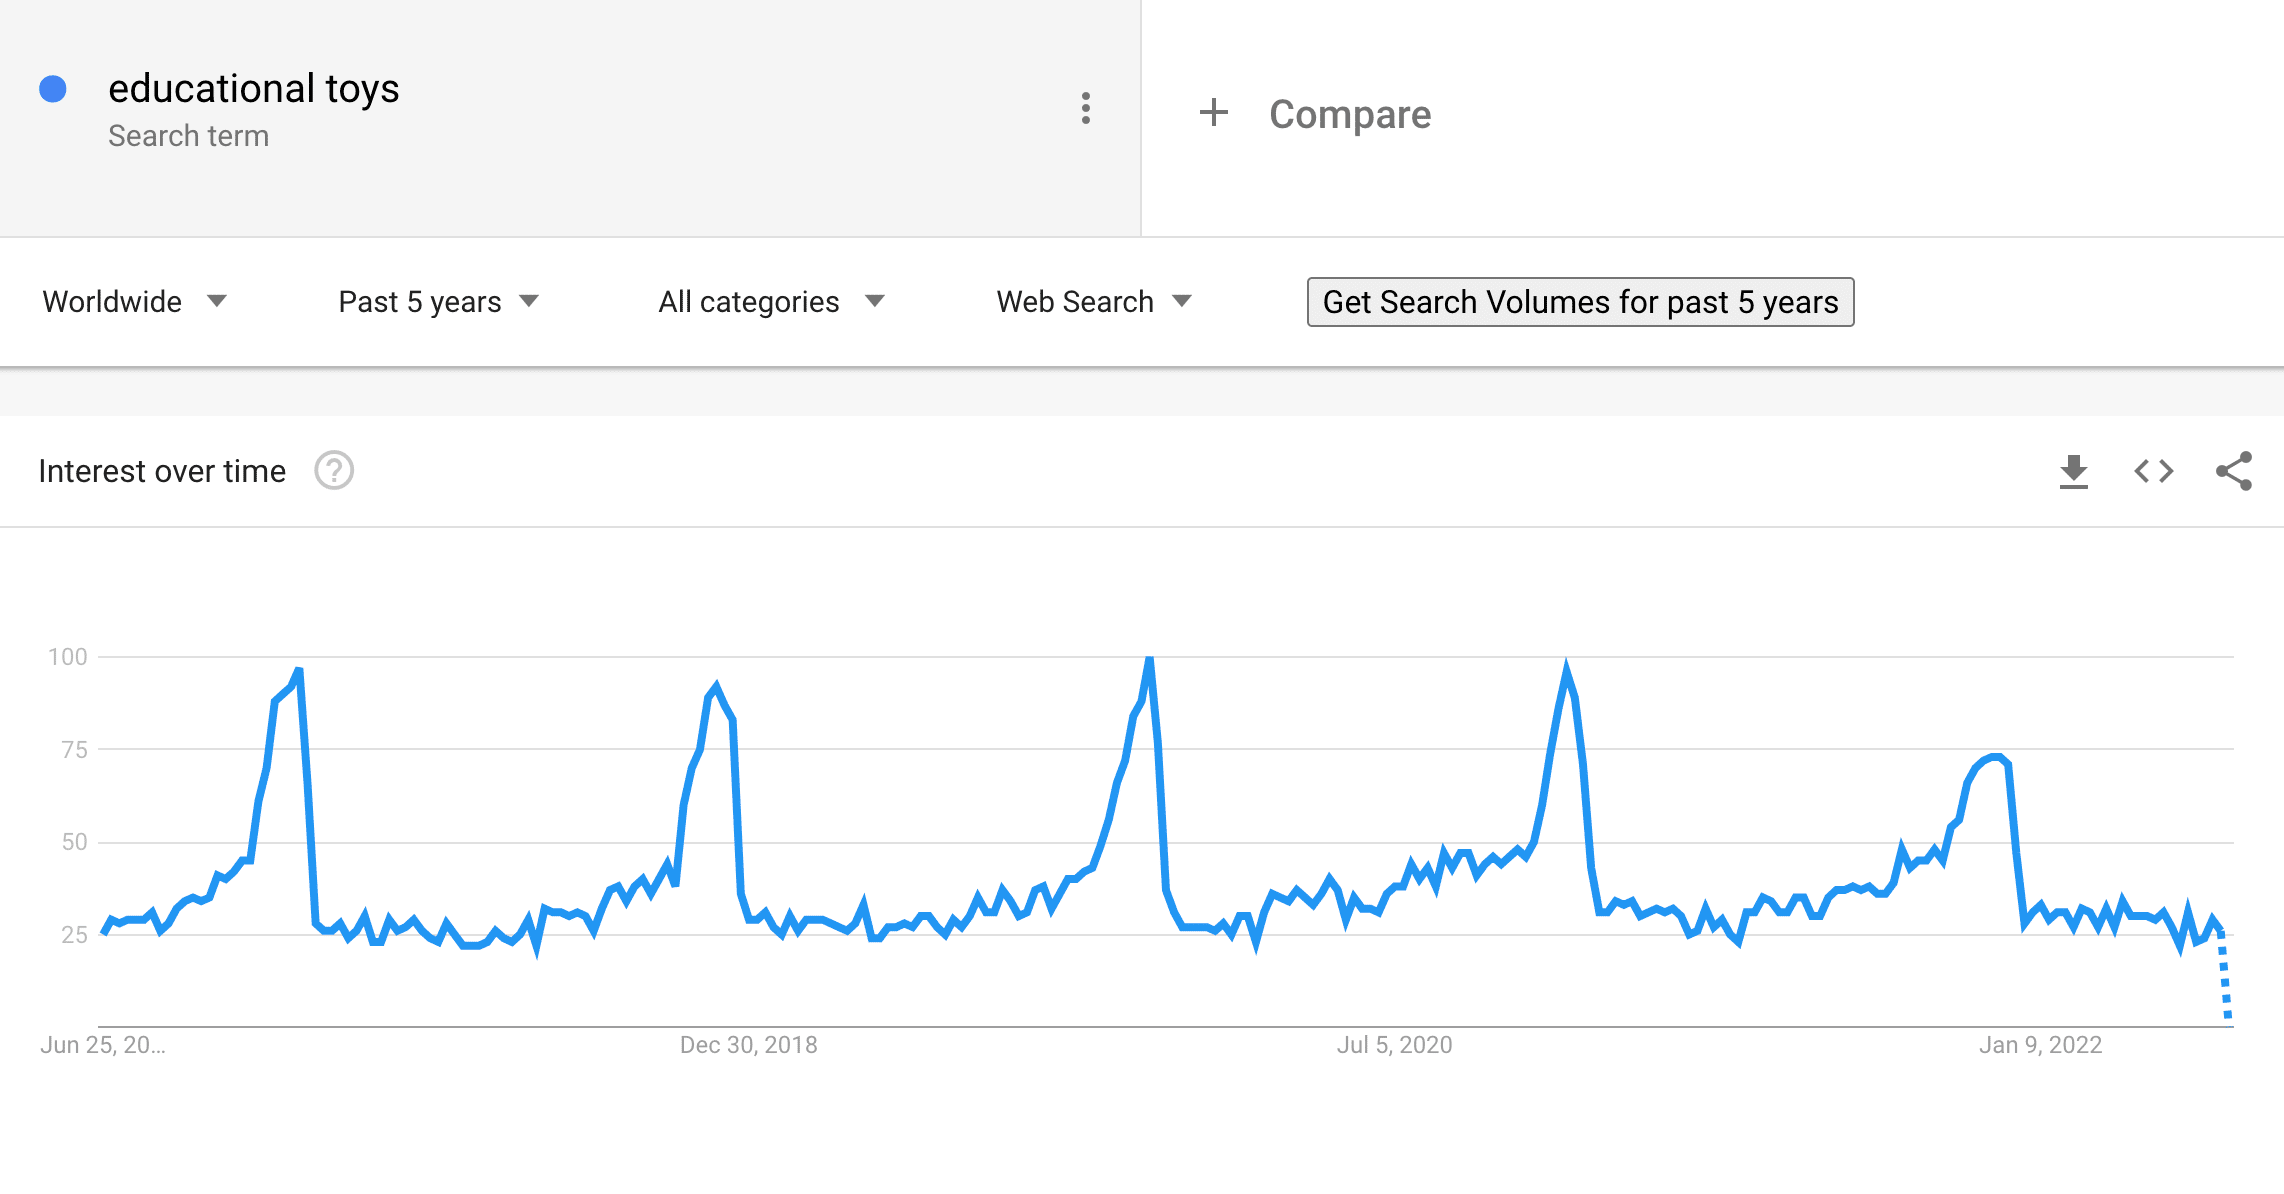 Educational toys on Google Trends